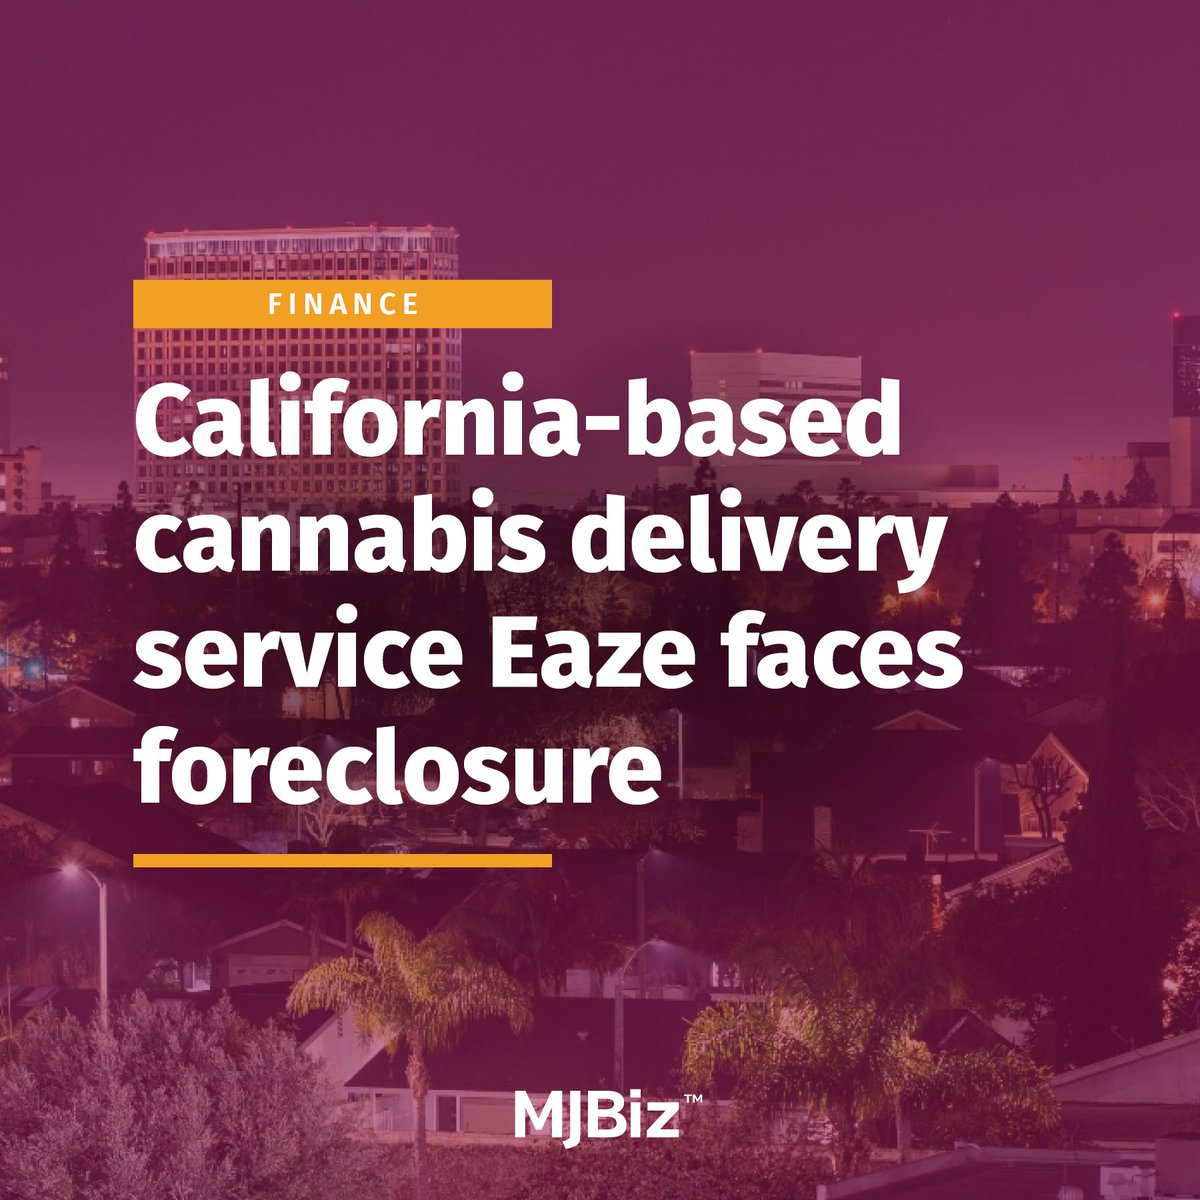 The largest #marijuana delivery company in the biggest regulated U.S. marijuana market is facing financial troubles. More to the story here: bit.ly/4bpSozf (Photo by Matt Gush/stock.adobe.com)